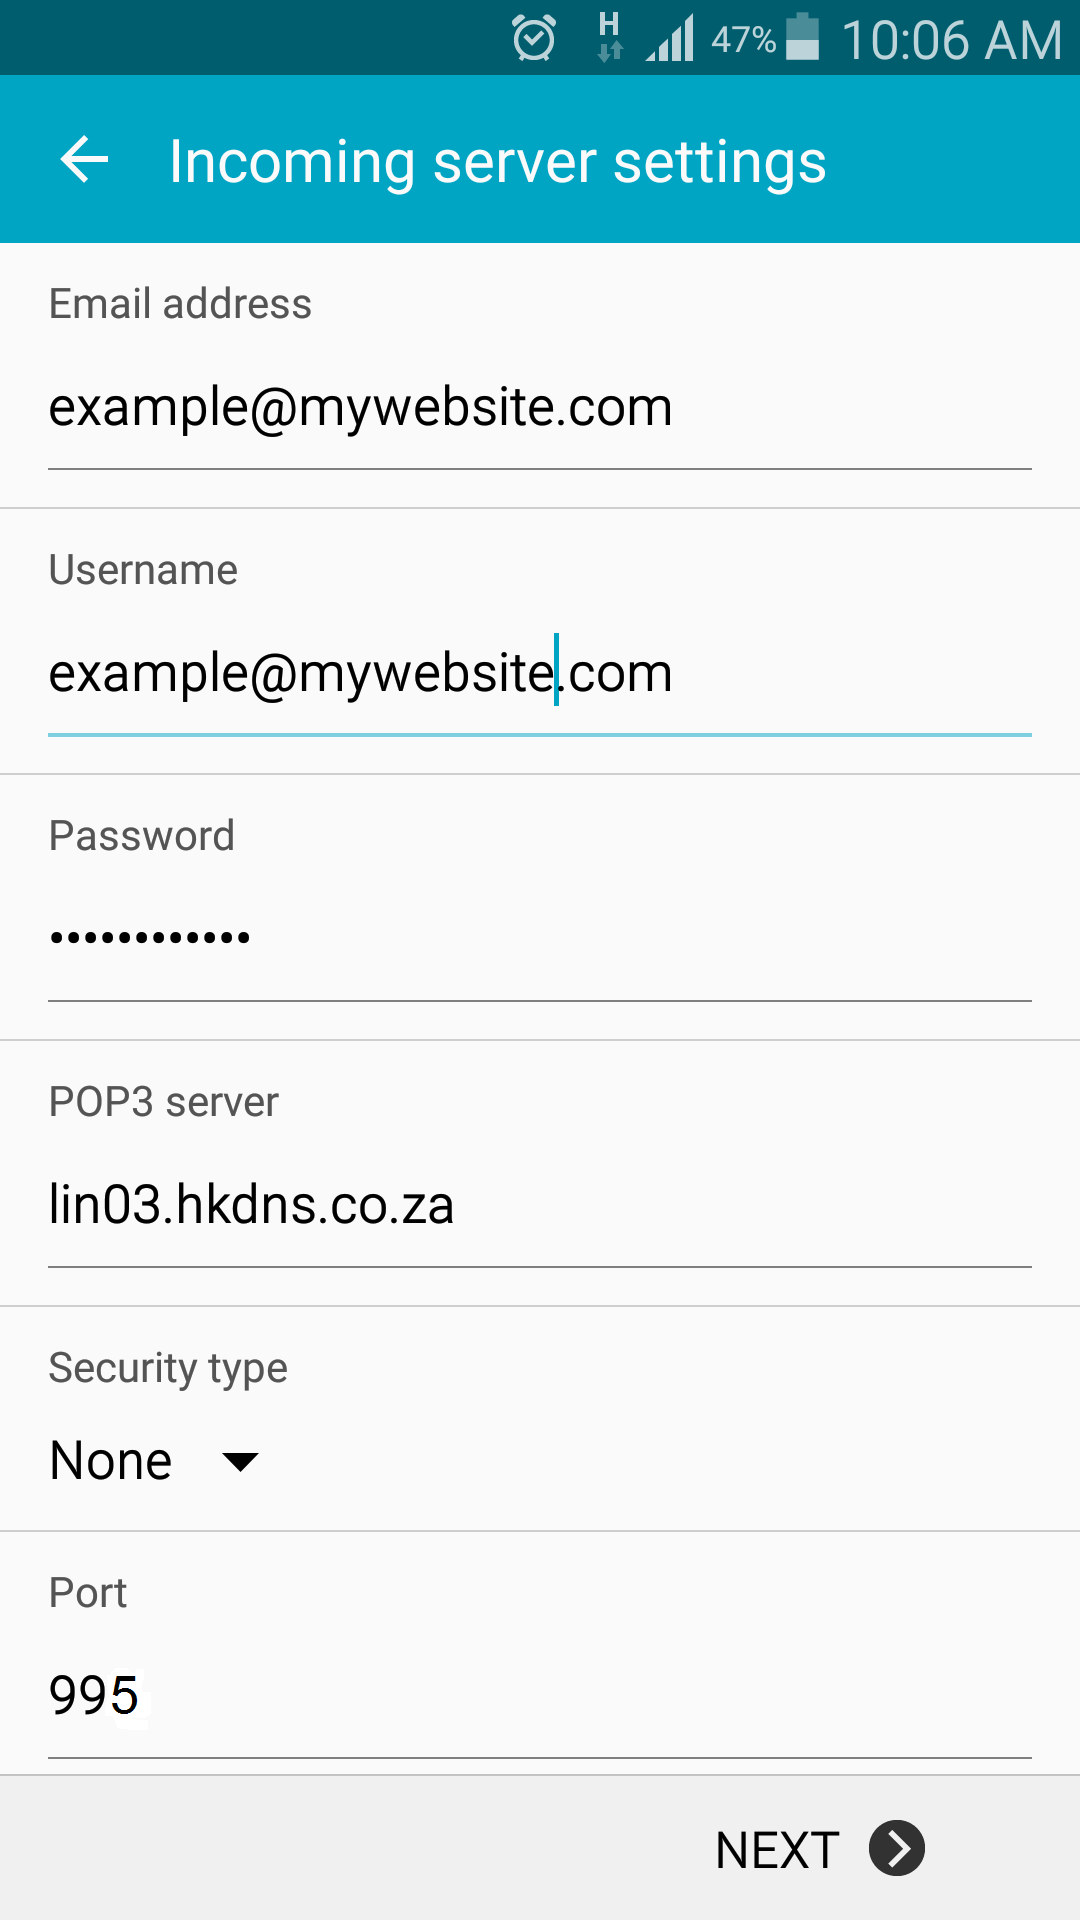 E-mail address and Password